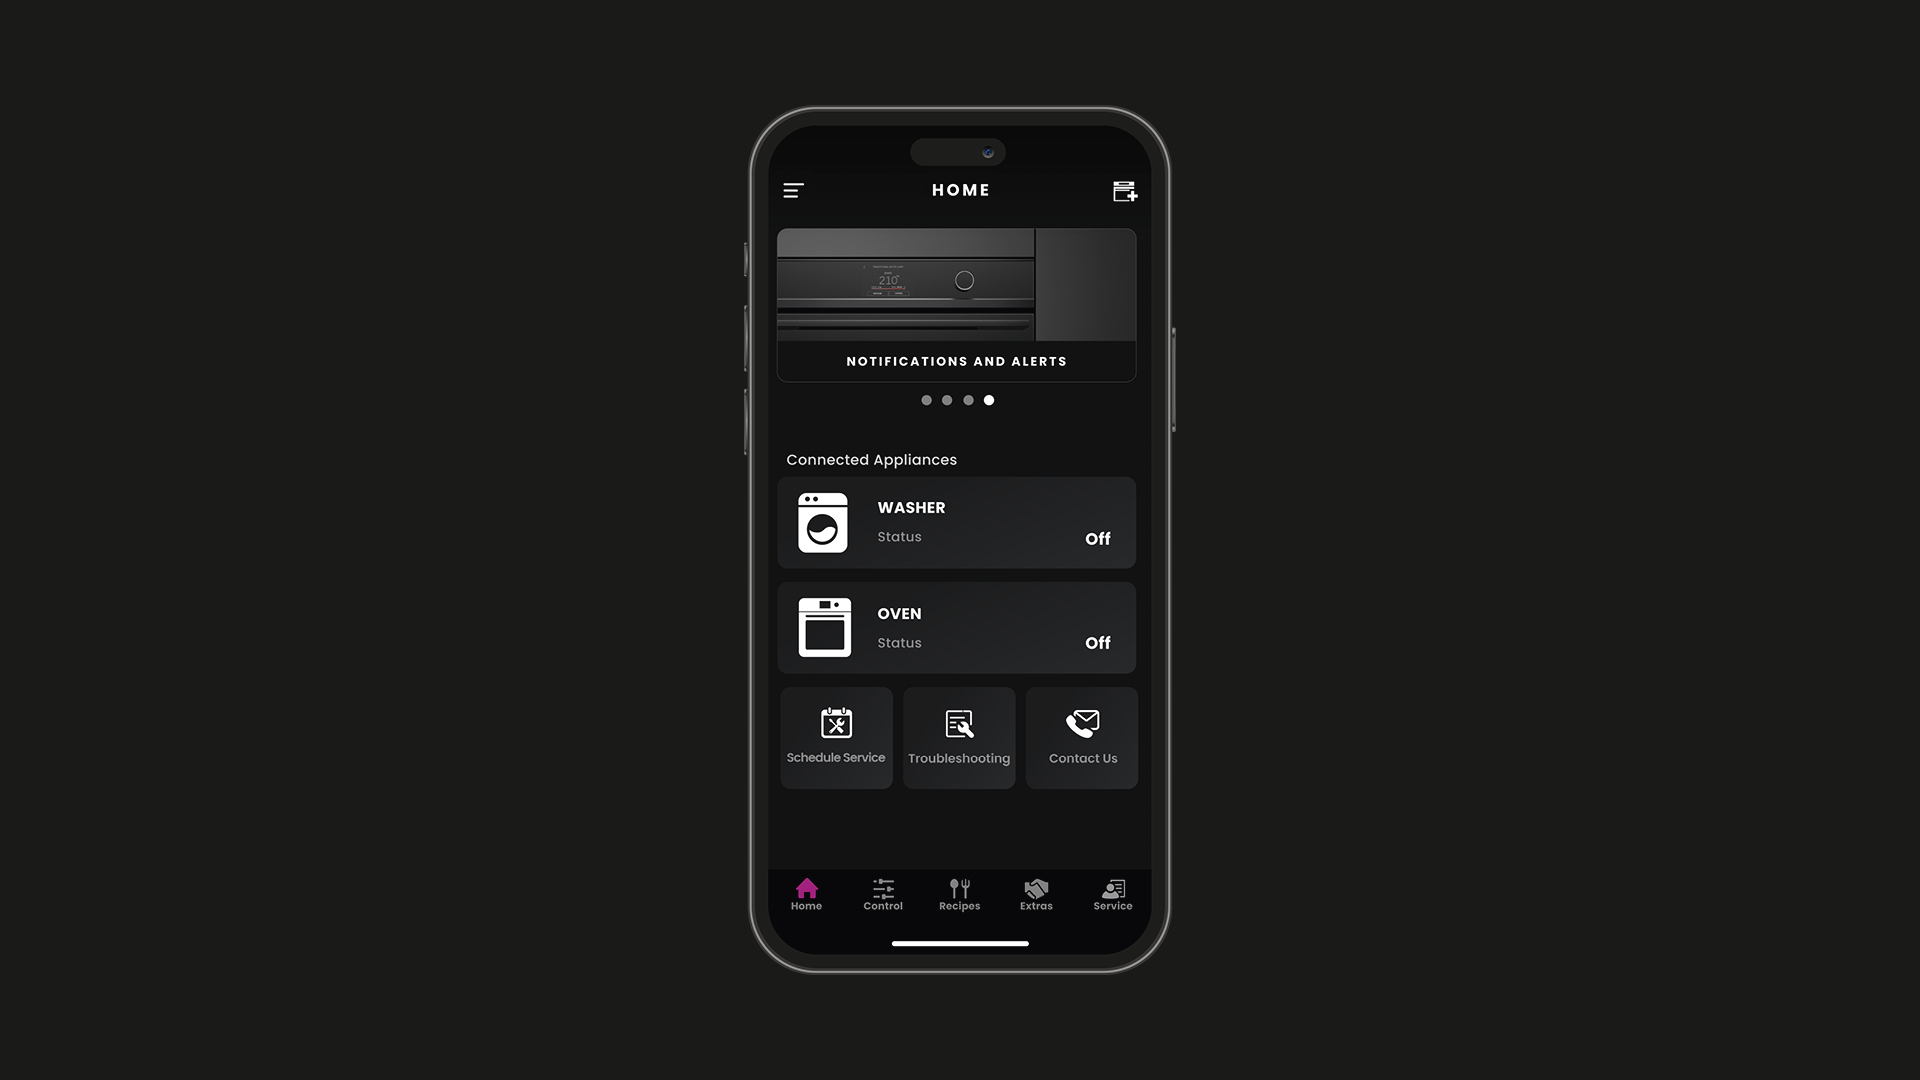 Closeup of SmartHQ app interface on mobile phone